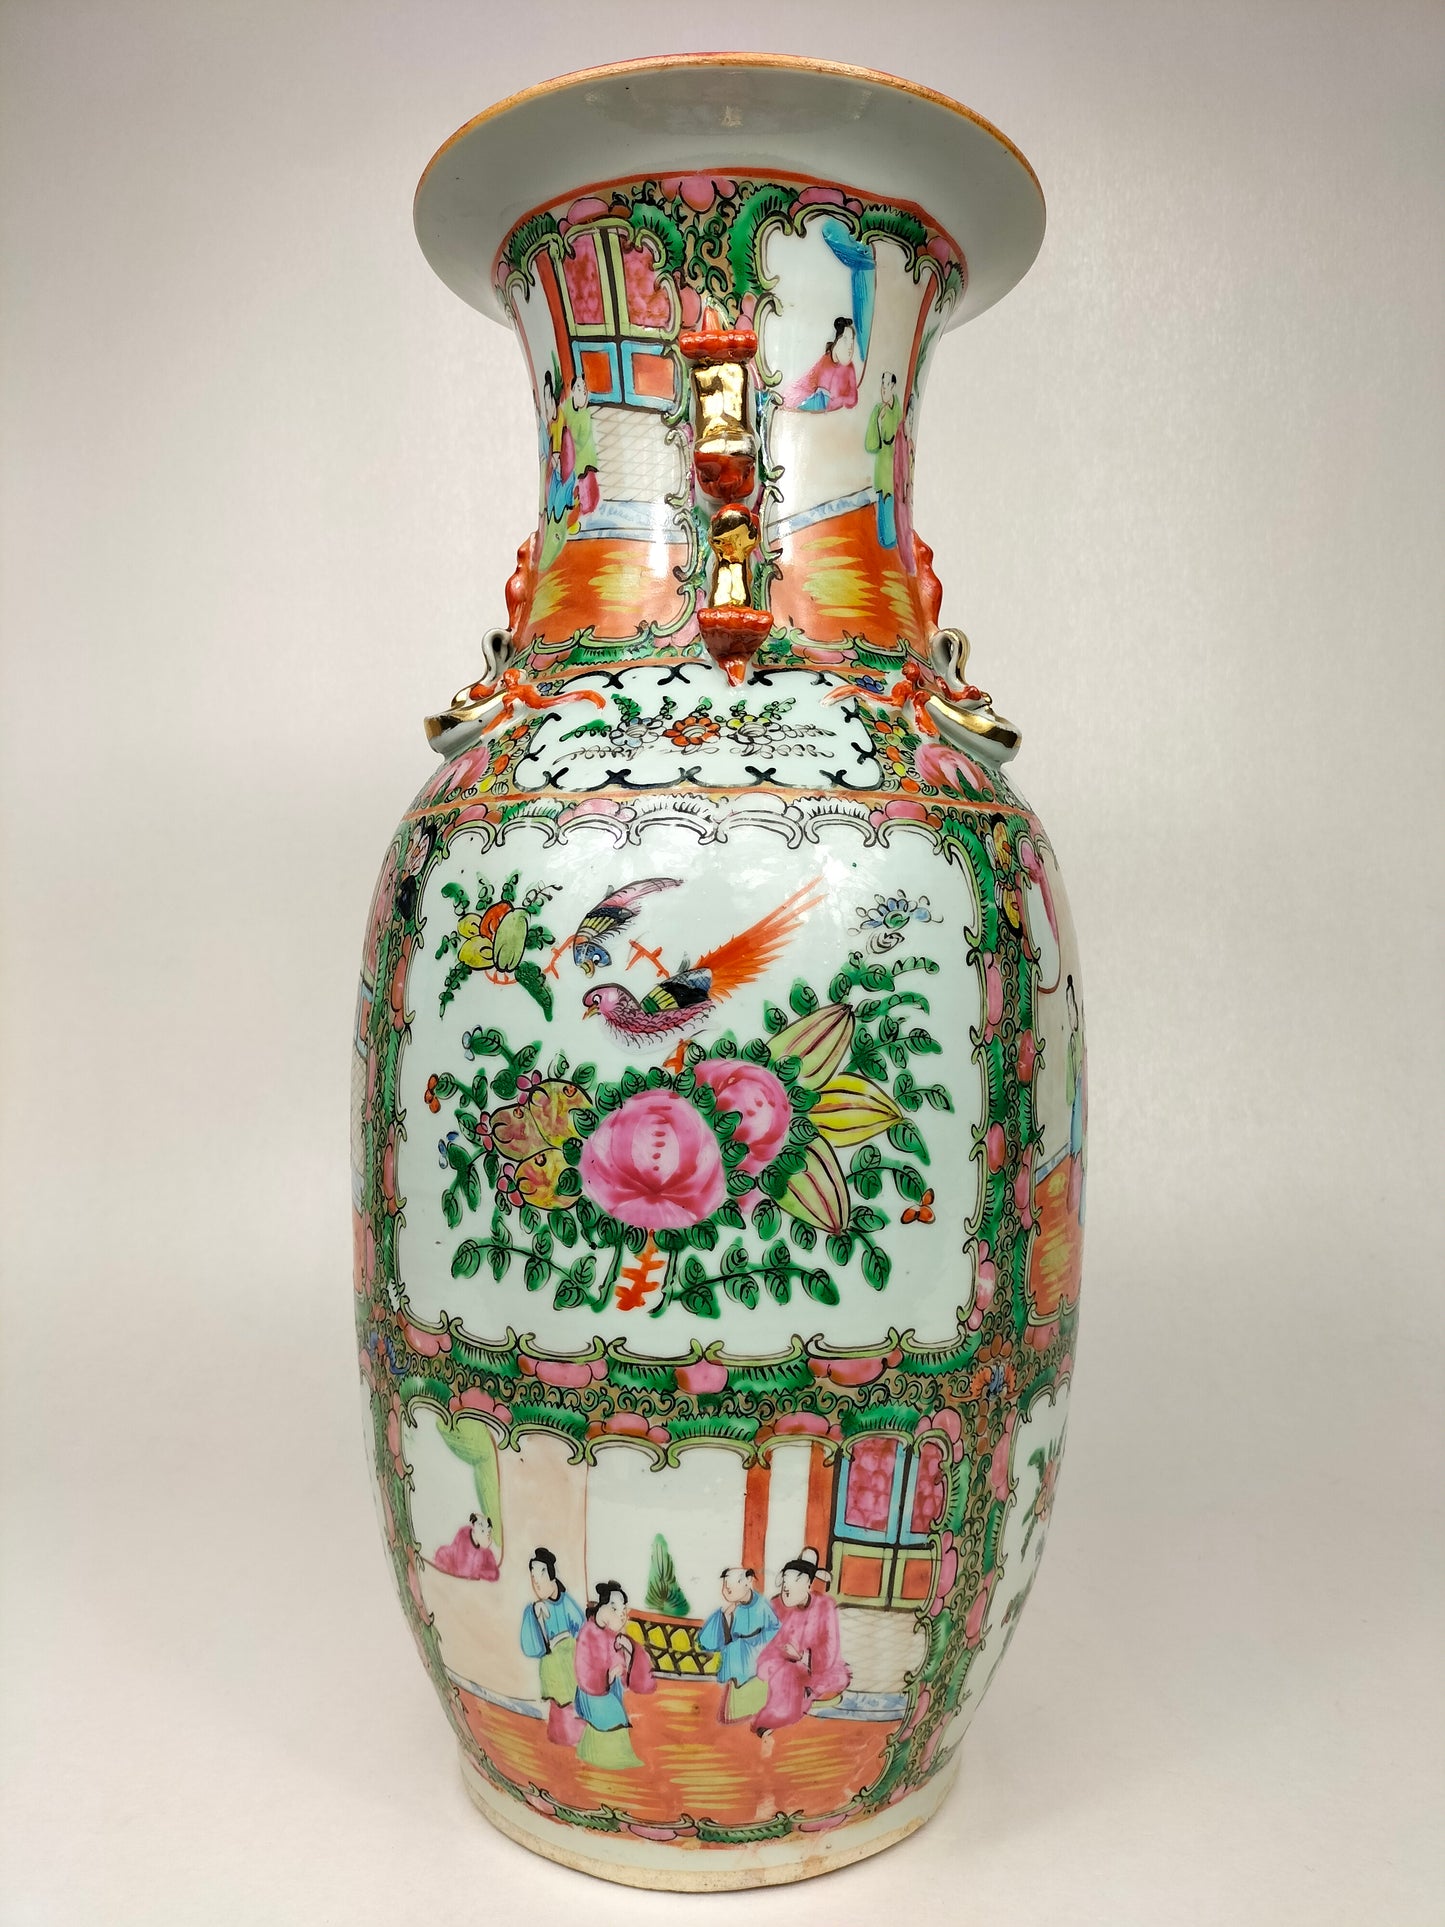 Antique Chinese canton rose medallion vase decorated with figures and floral motifs // Guangzhou - China - Qing Dynasty - 19th century